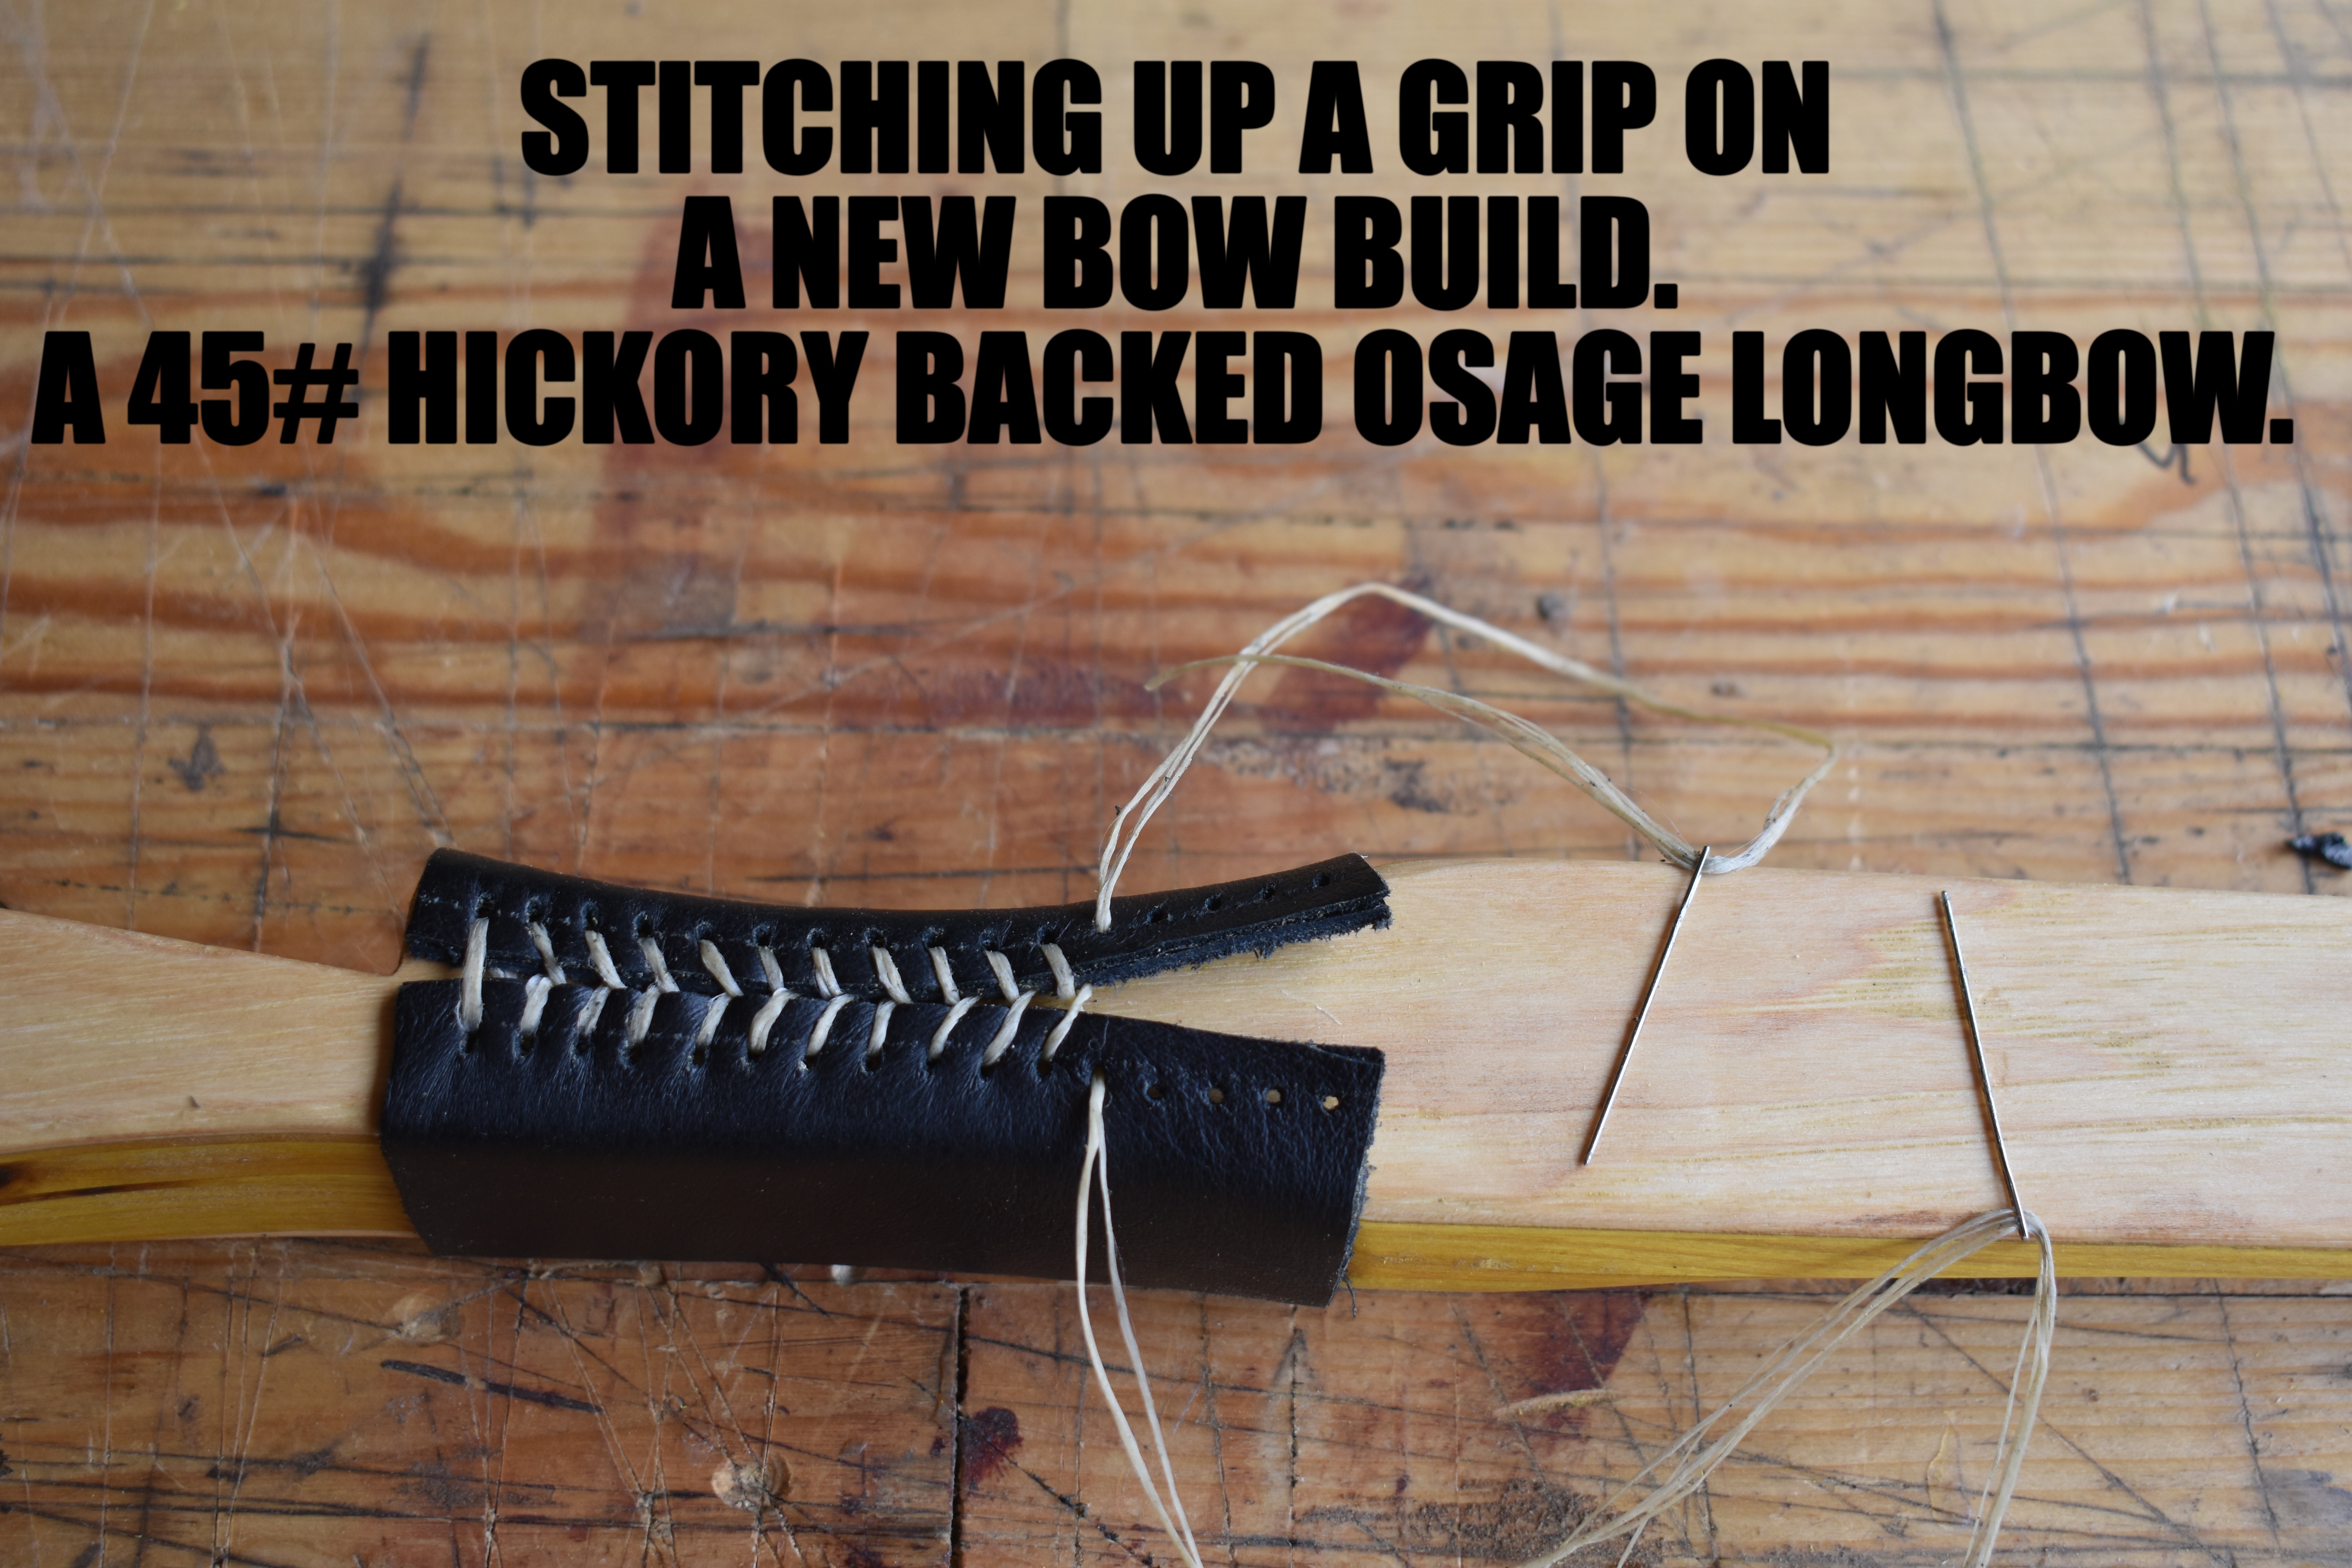 Osage longbow | STITCHING UP A GRIP ON A NEW BOW BUILD.
A 45# HICKORY BACKED OSAGE LONGBOW. | image tagged in osage longbow,kewlew | made w/ Imgflip meme maker